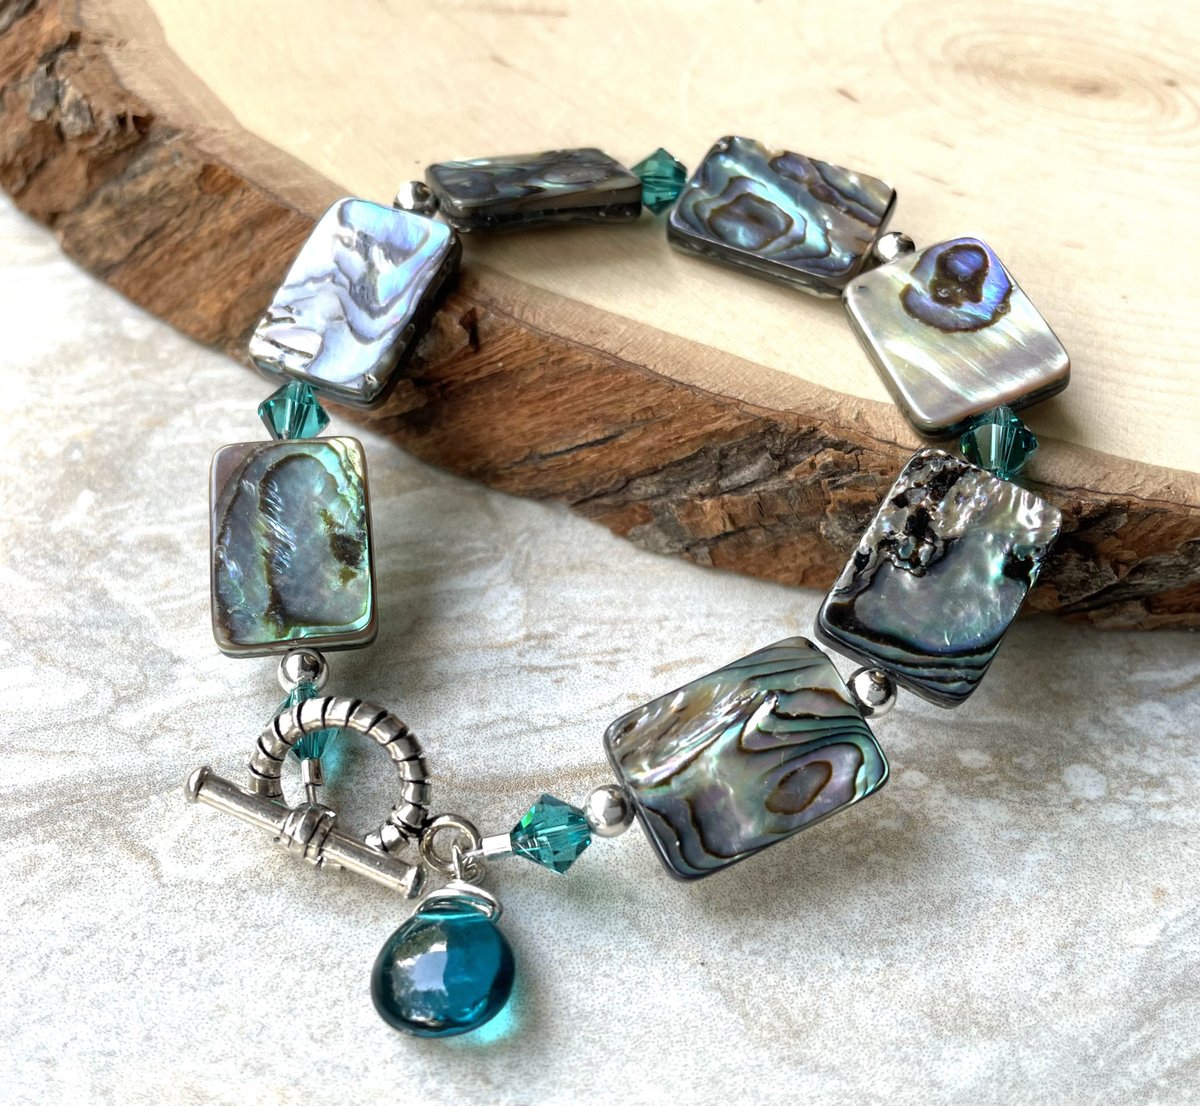 Abalone Sterling Silver Bracelet with Teal Quartz and Swarovski Crystals Toggle Clasp tuppu.net/6560bda6 #Jewelry trends #JemsbyJBandCompany #Handcrafted